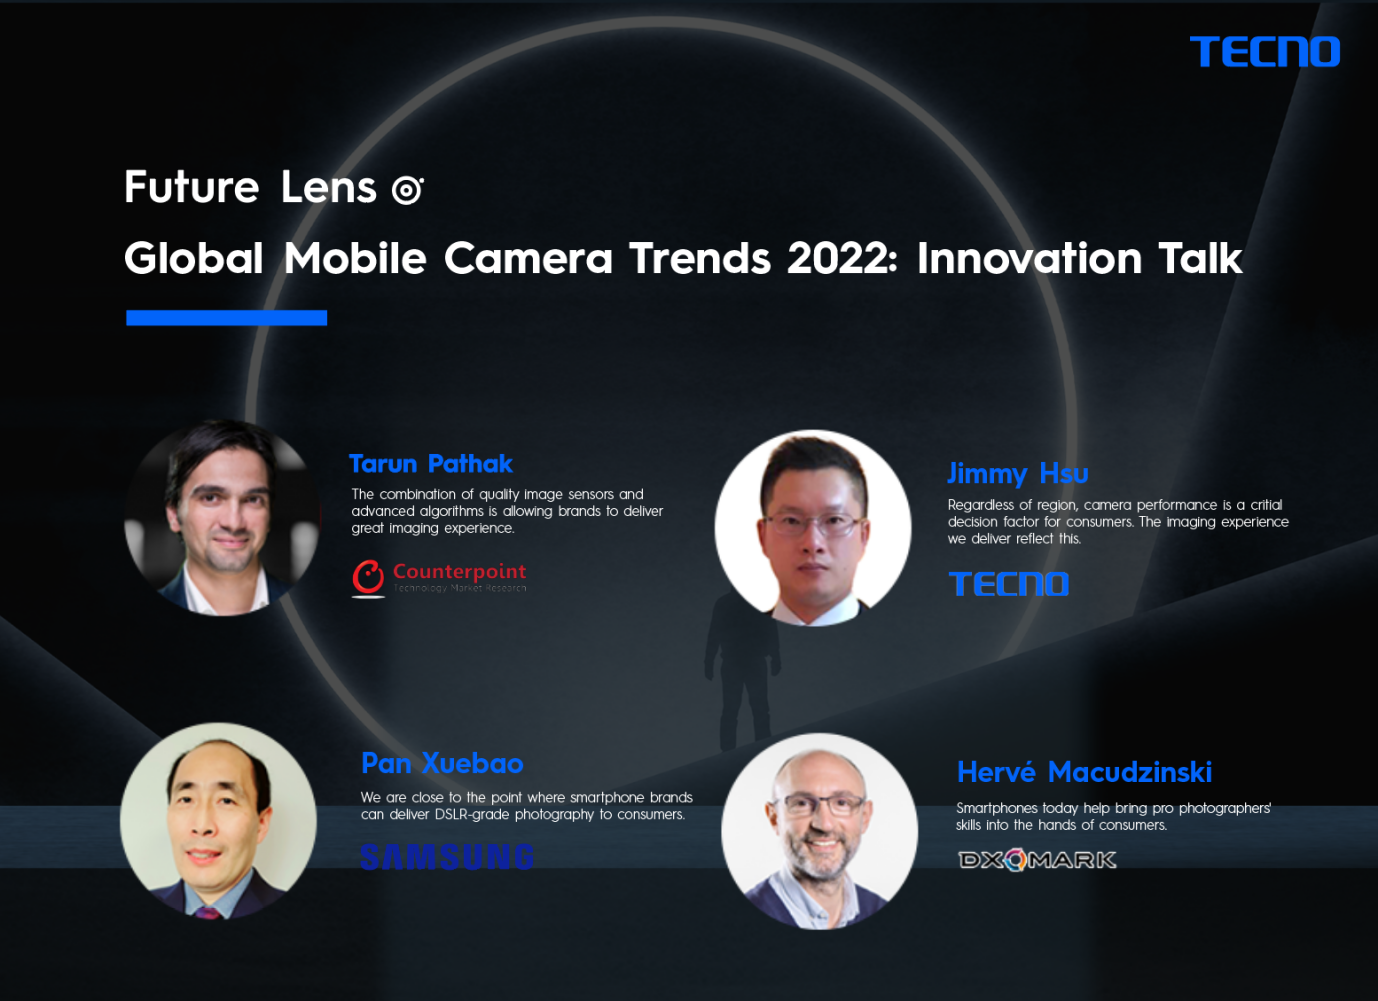 Tecno, Mobile Camera Trends 2022 Shared by Four Global Experts